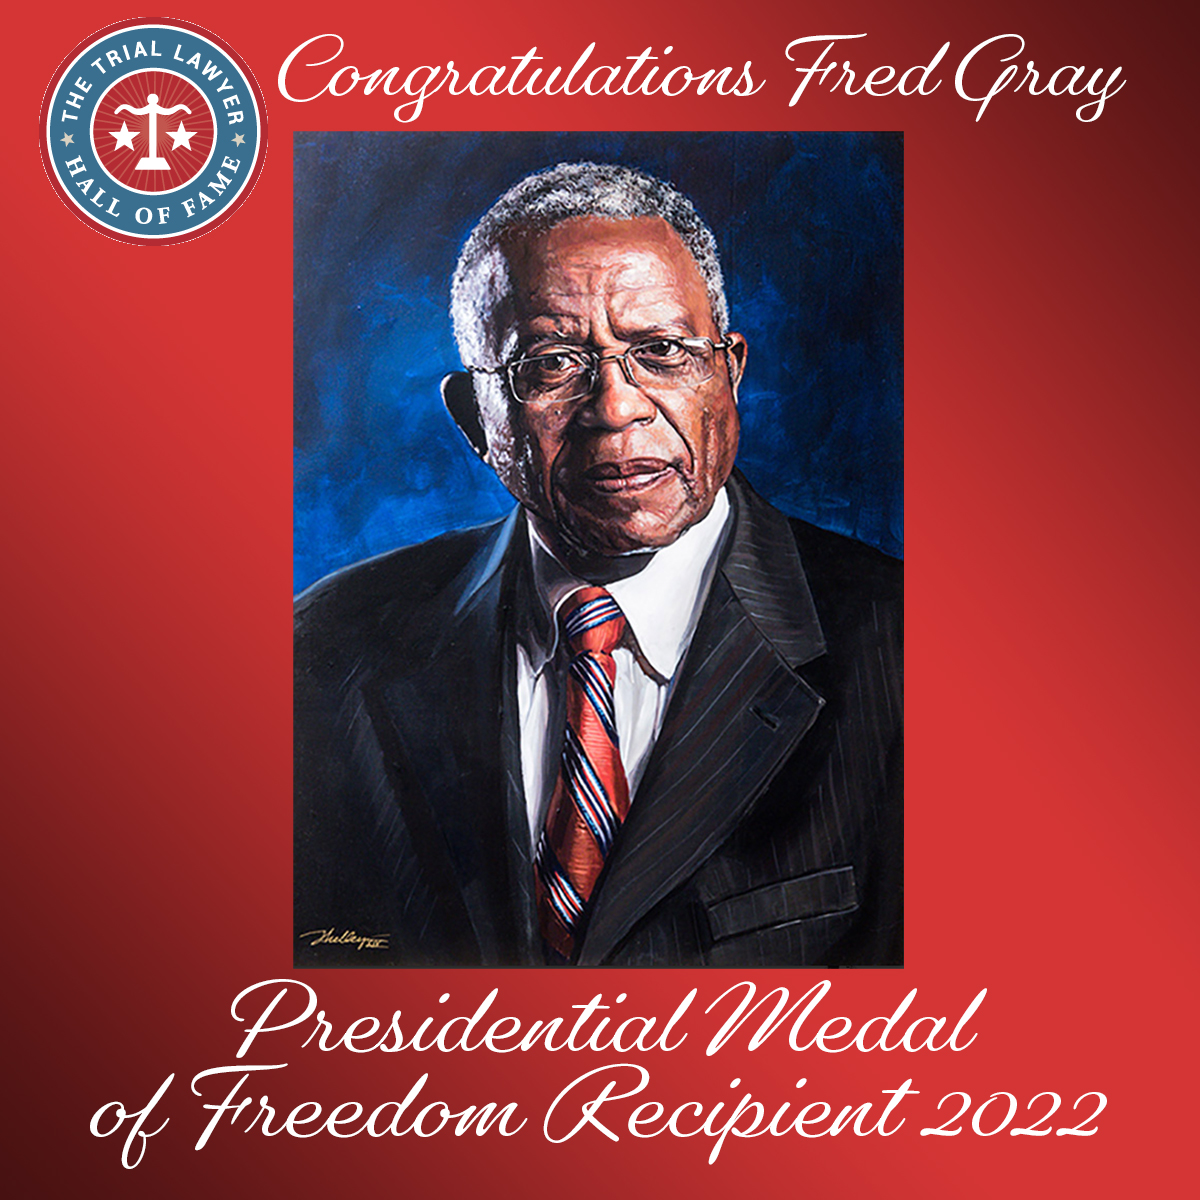 Congratulations to Fred Gray, recipient of the The Presidential Medal of Freedom. Fred Gray was one of the first Black members of the Alabama state legislature since Reconstruction & who represented Rosa Parks, the NAACP, and Martin Luther King as an attorney. #medaloffreedom